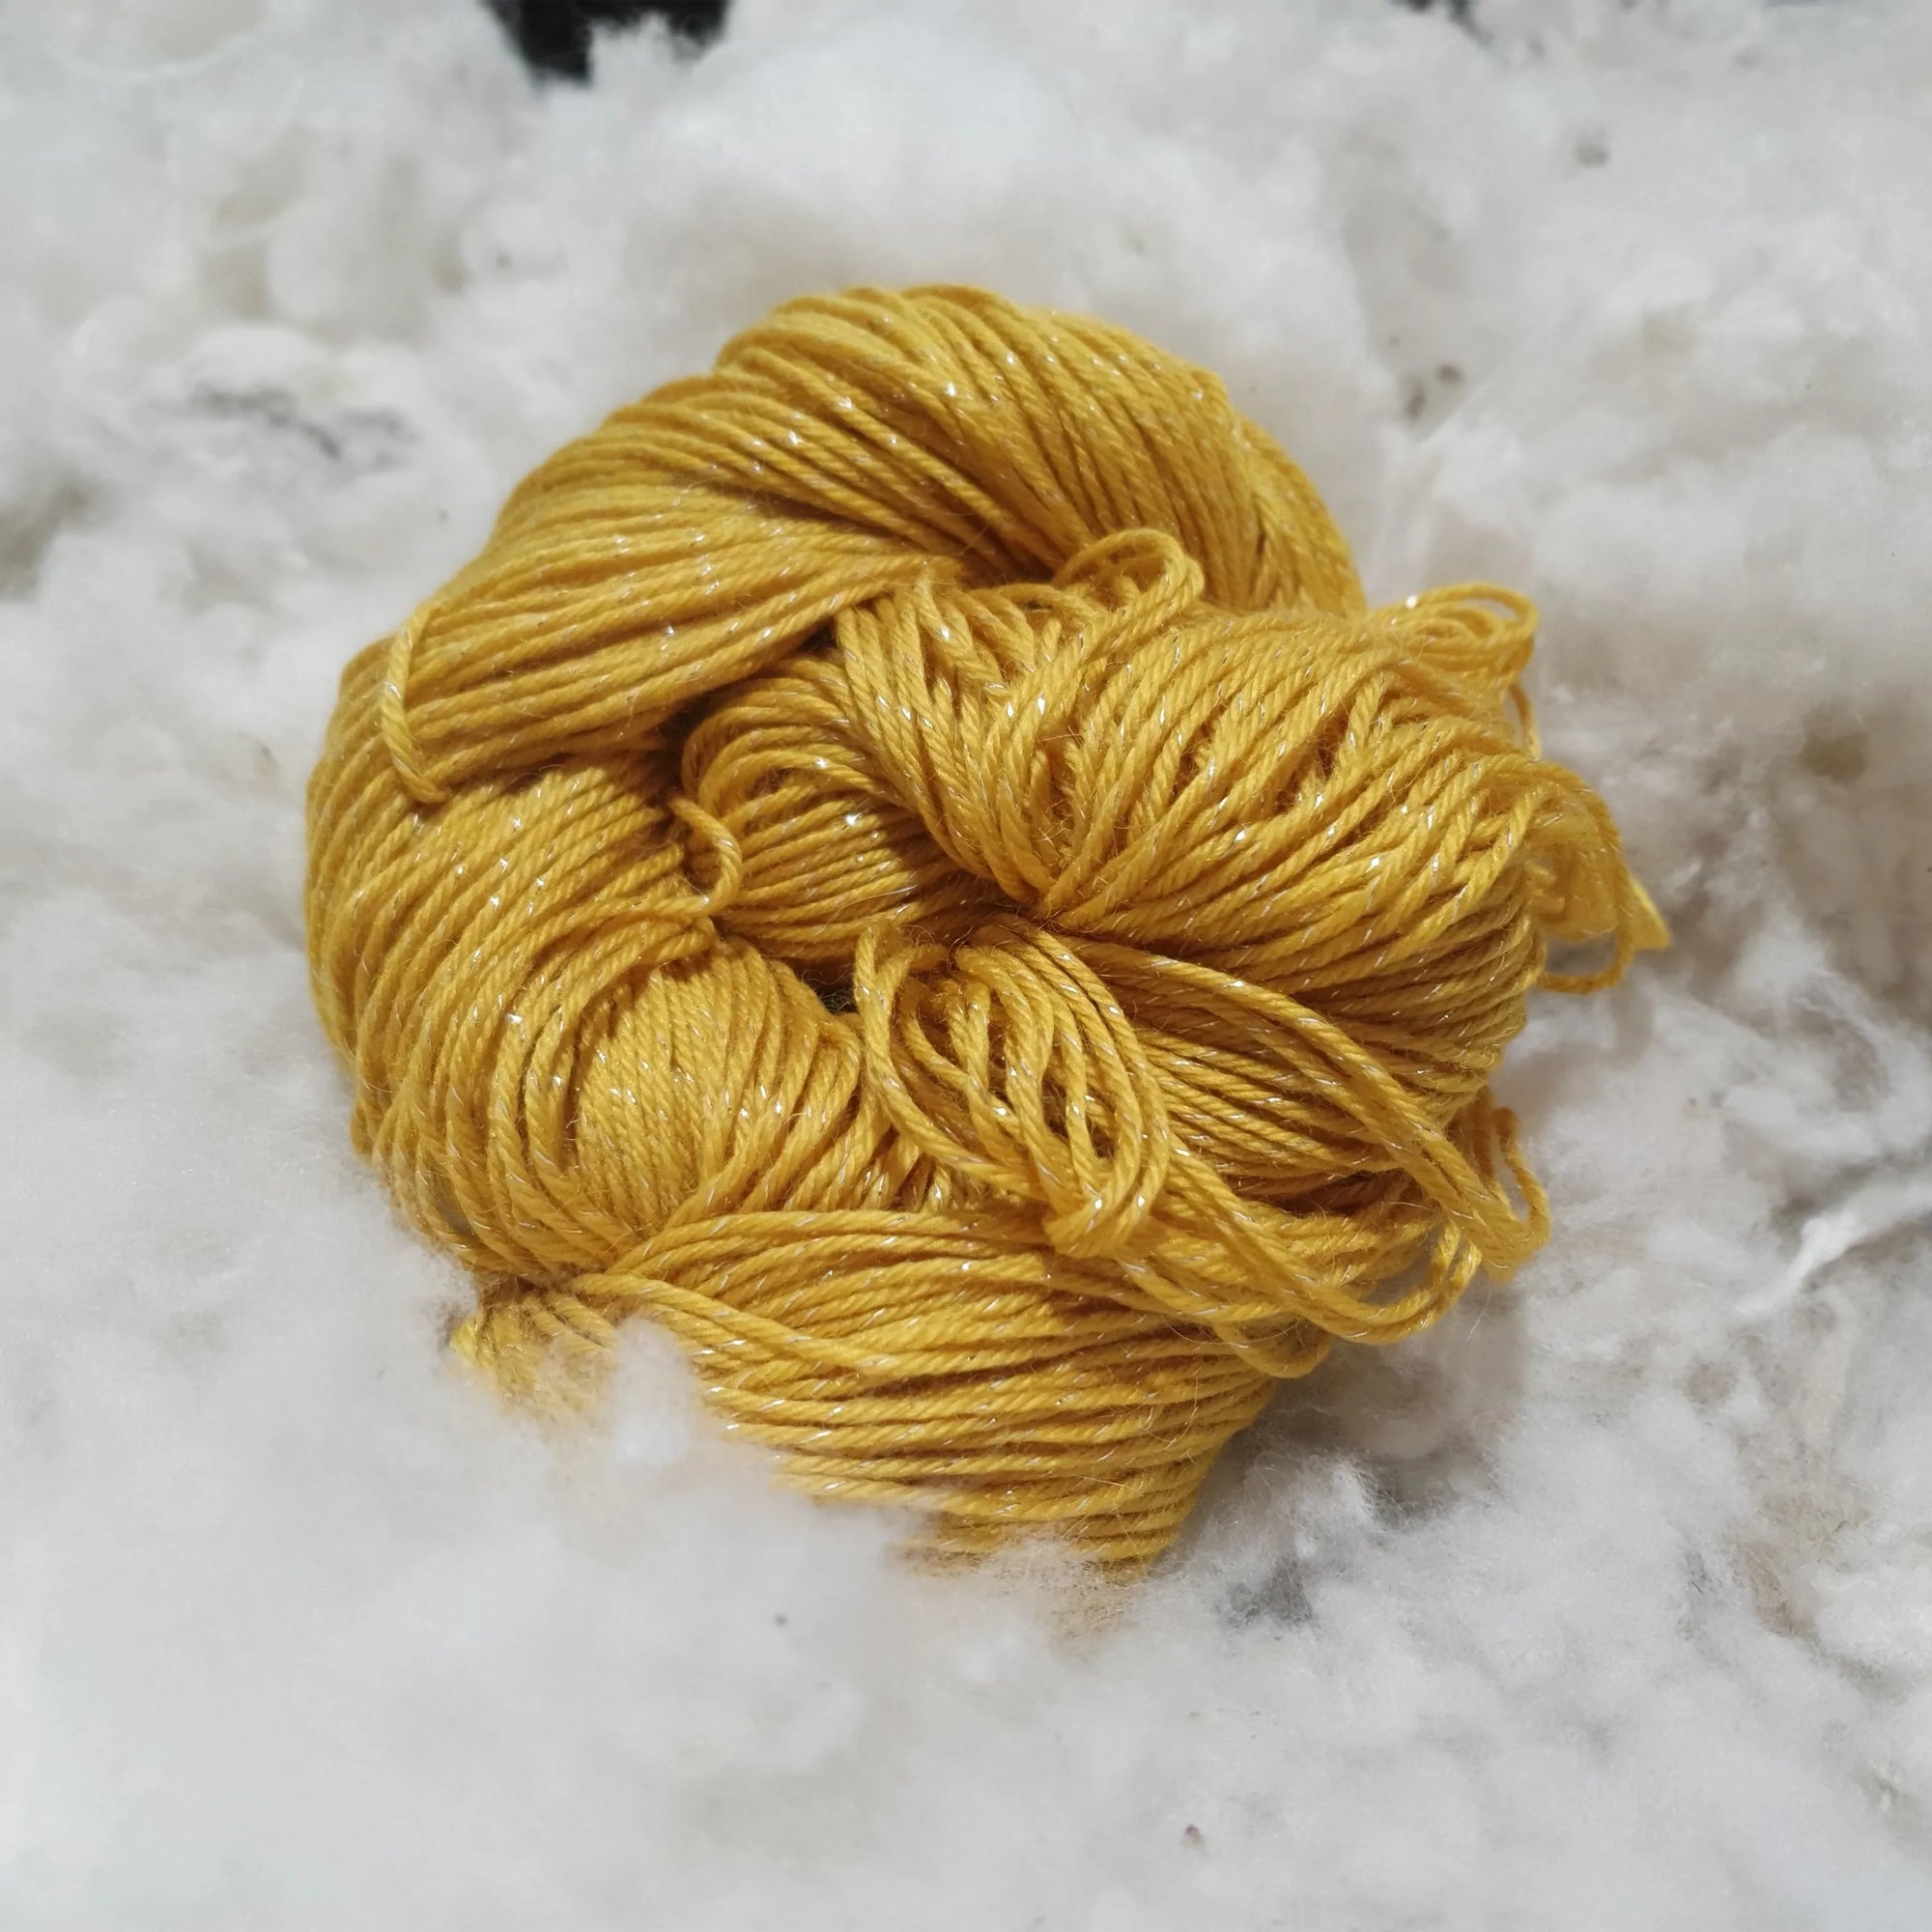 Nundle Dyed Metallica Yarn 4ply Equivalent - Butterscotch